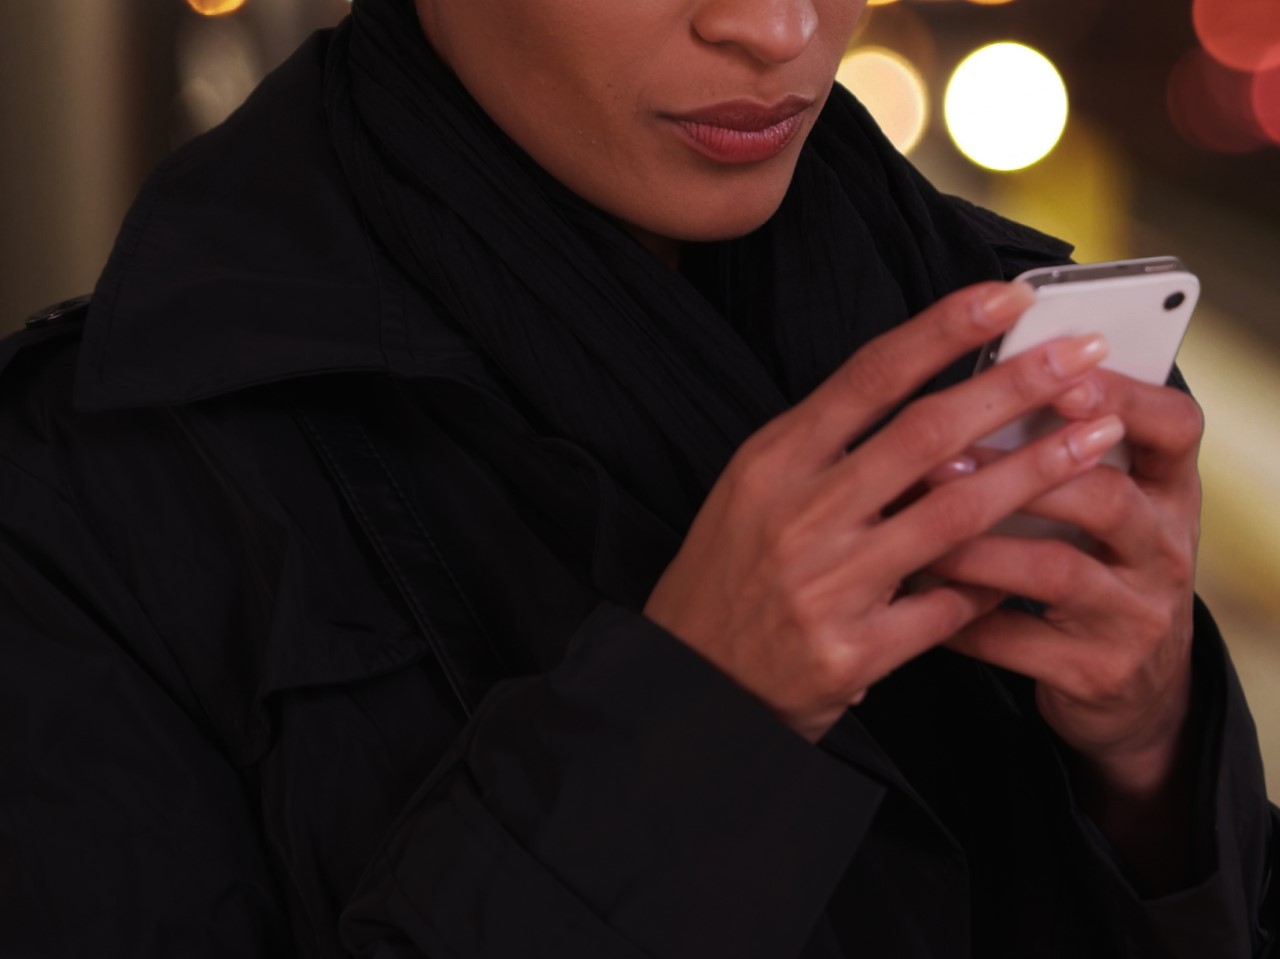 stock image of woman looking at mobile phone